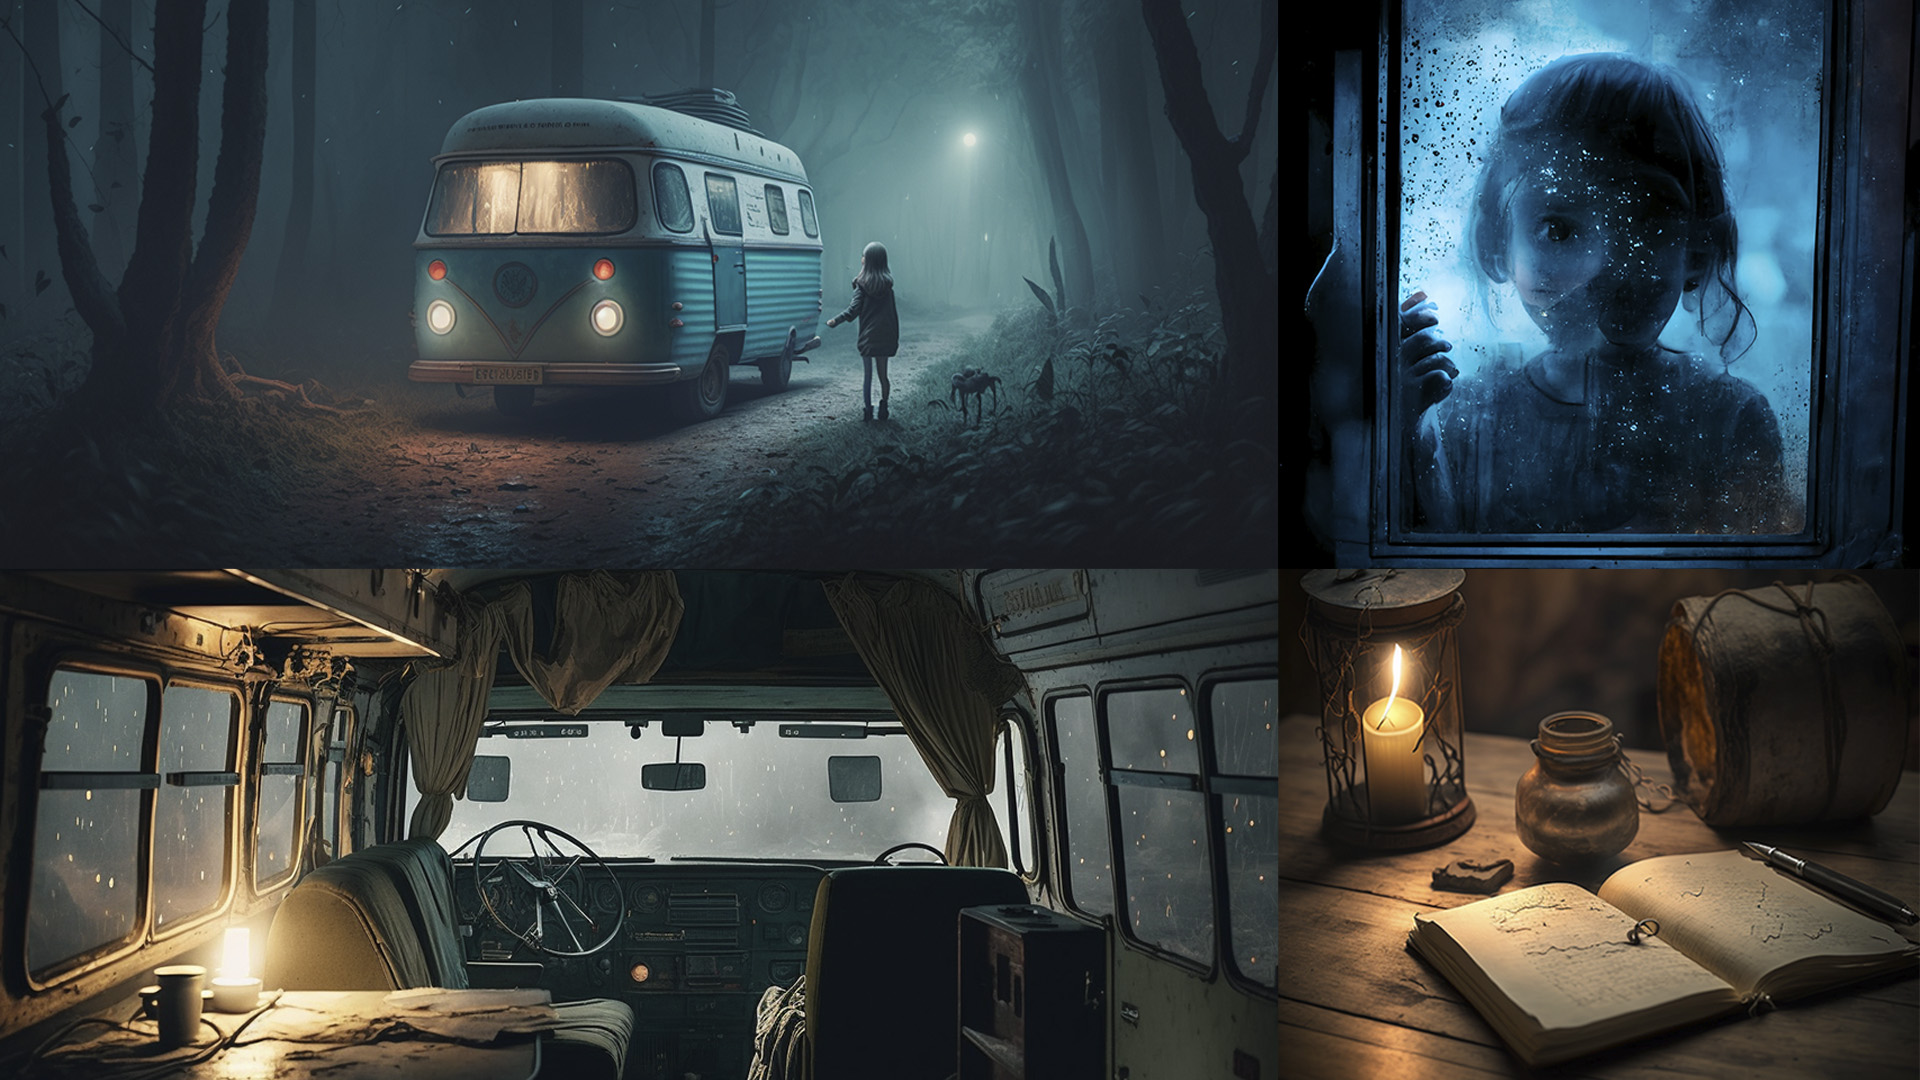 A mood board showing four pictures: a girl besides the van in the forest, the girl peeking inside through the misty van window, the inside space in the van, an old leather book lying on the table lit by a candle